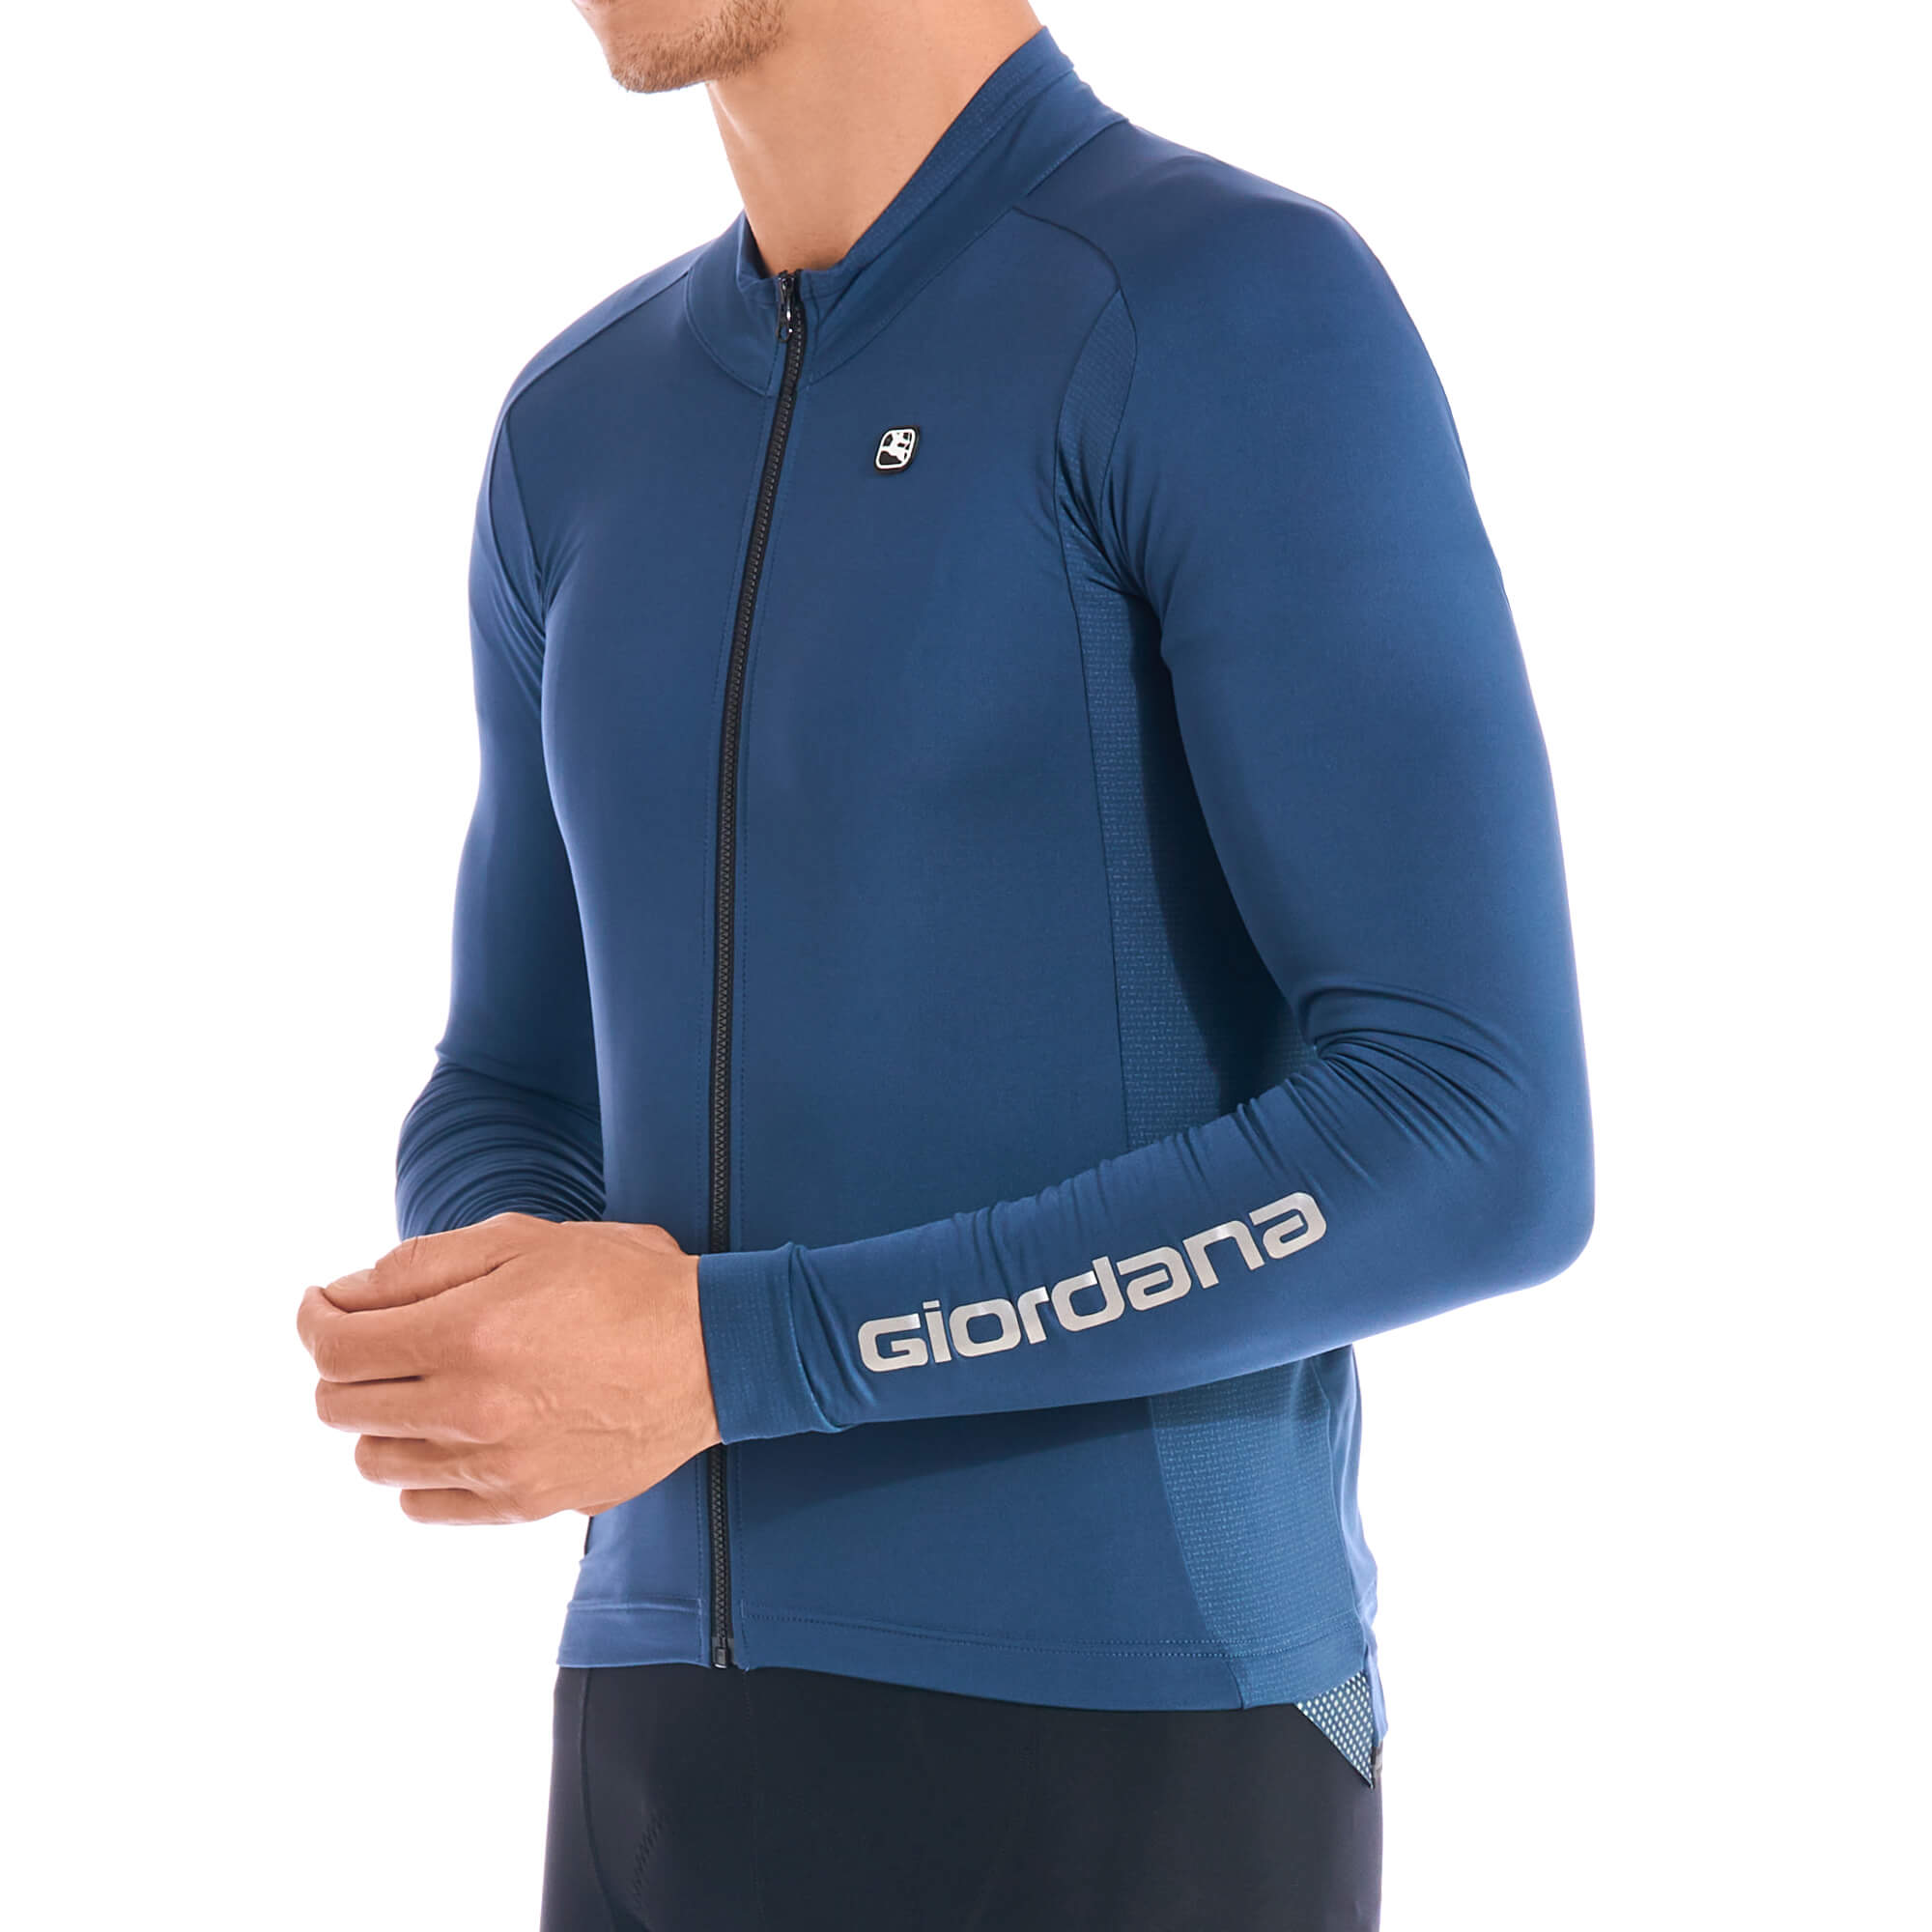 FR-C Pro Thermal Long Sleeve Jersey